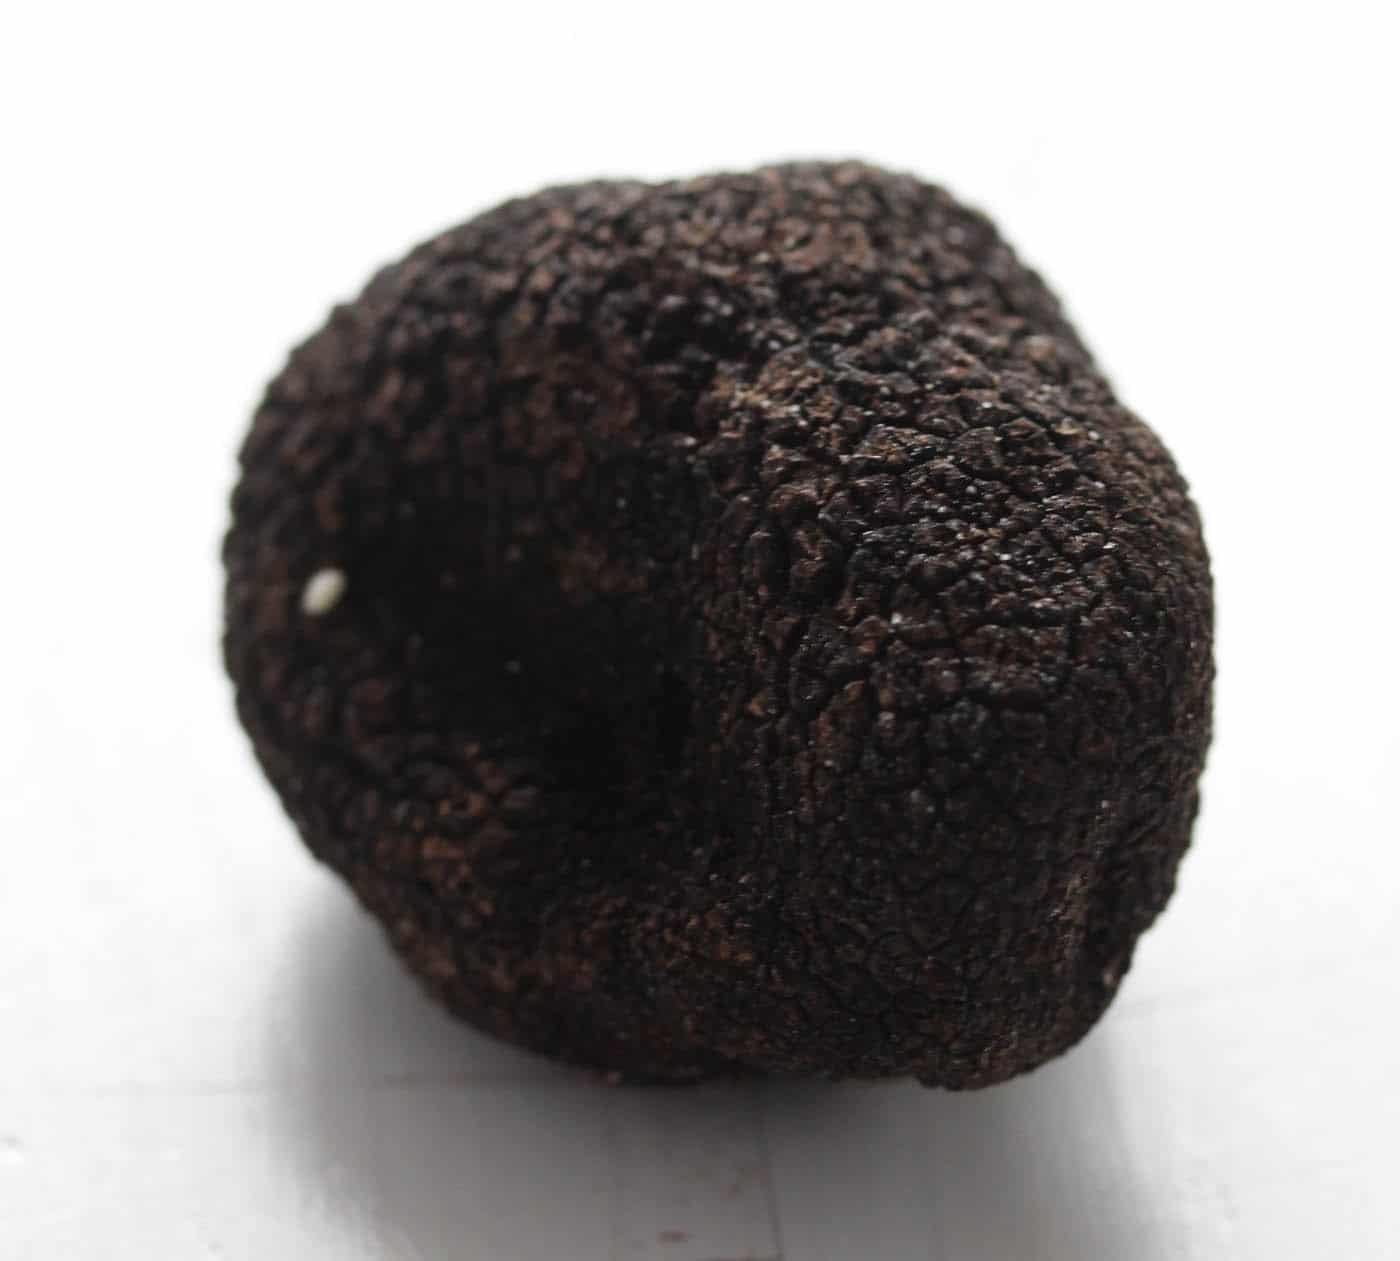 one small black truffle on a white table.